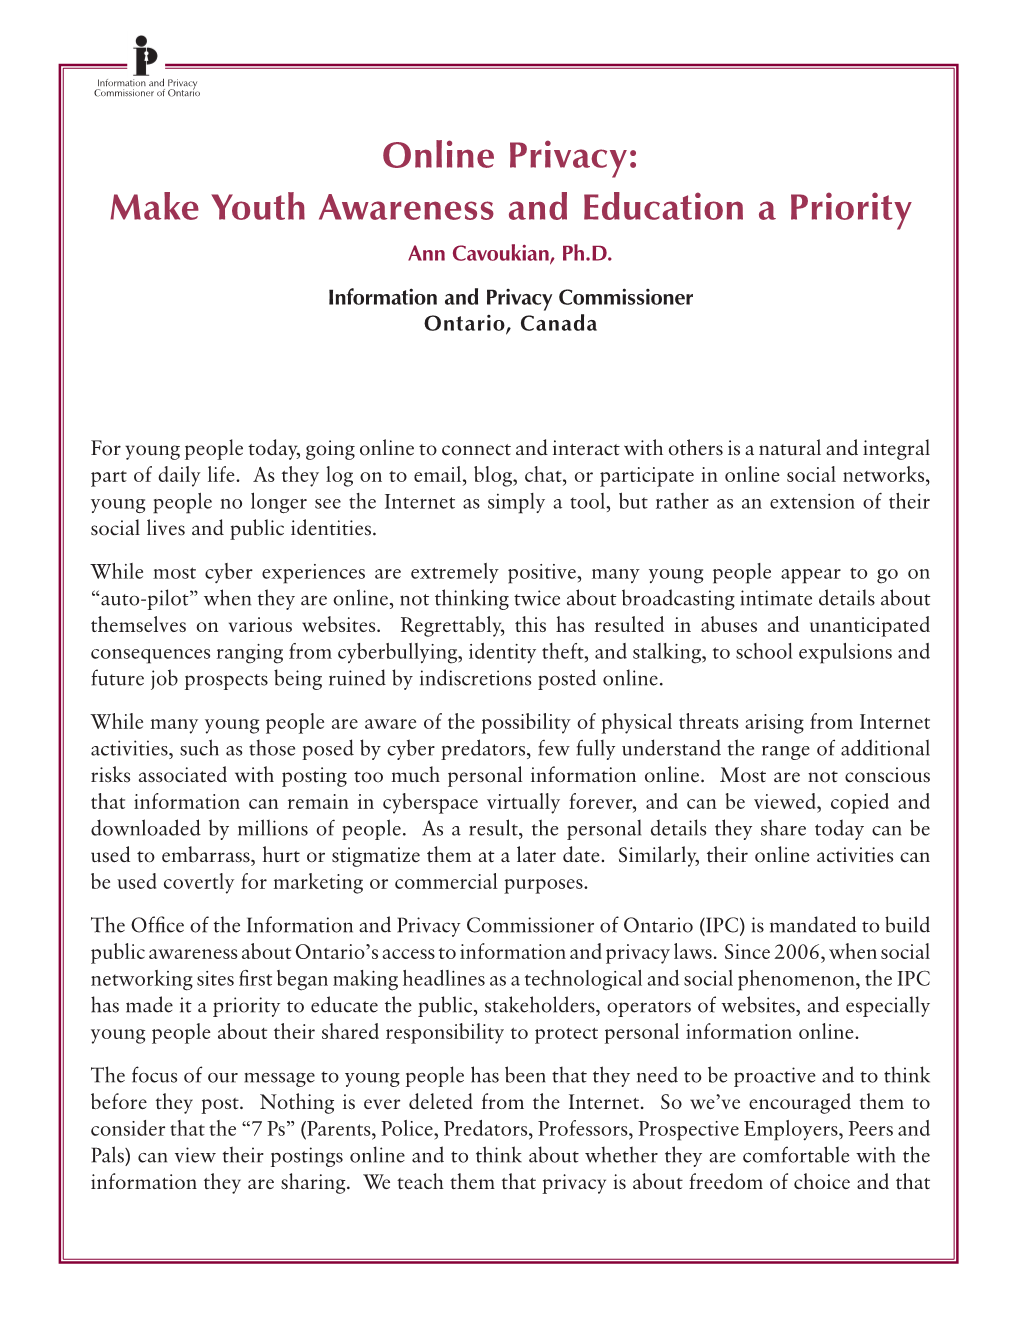 Online Privacy: Make Youth Awareness and Education a Priority Ann Cavoukian, Ph.D